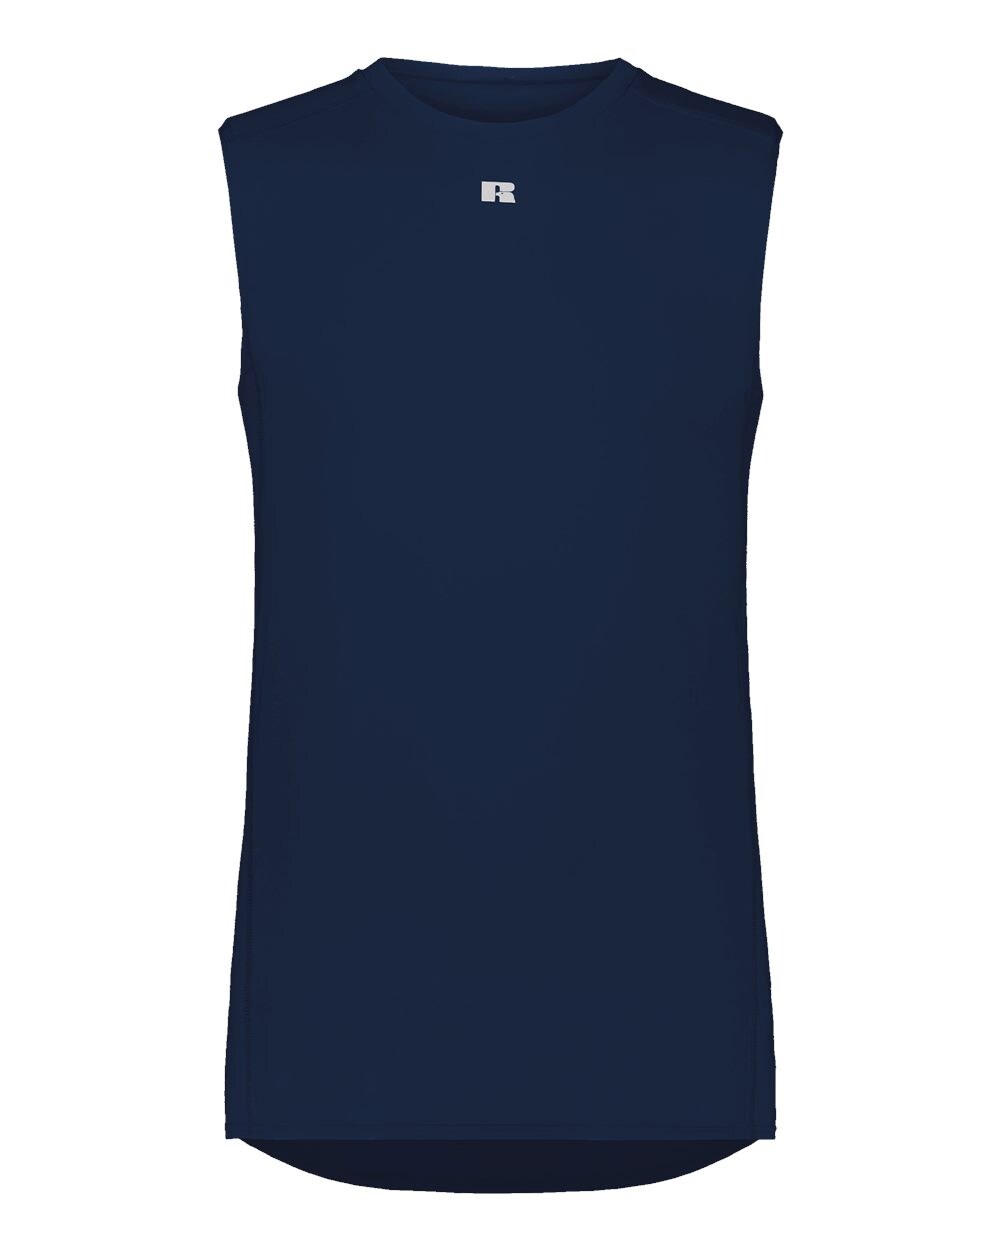 Russell Athletic&#xAE; - CoolCore Compression Tank Top - R22CPM | 84/16 polyester/spandex elastane Xtreme compression cloth | 92/8 polyester/elastane stretch mesh inserts on underarm | Unleash Your Style with Our Trendy Sleeveless shirt